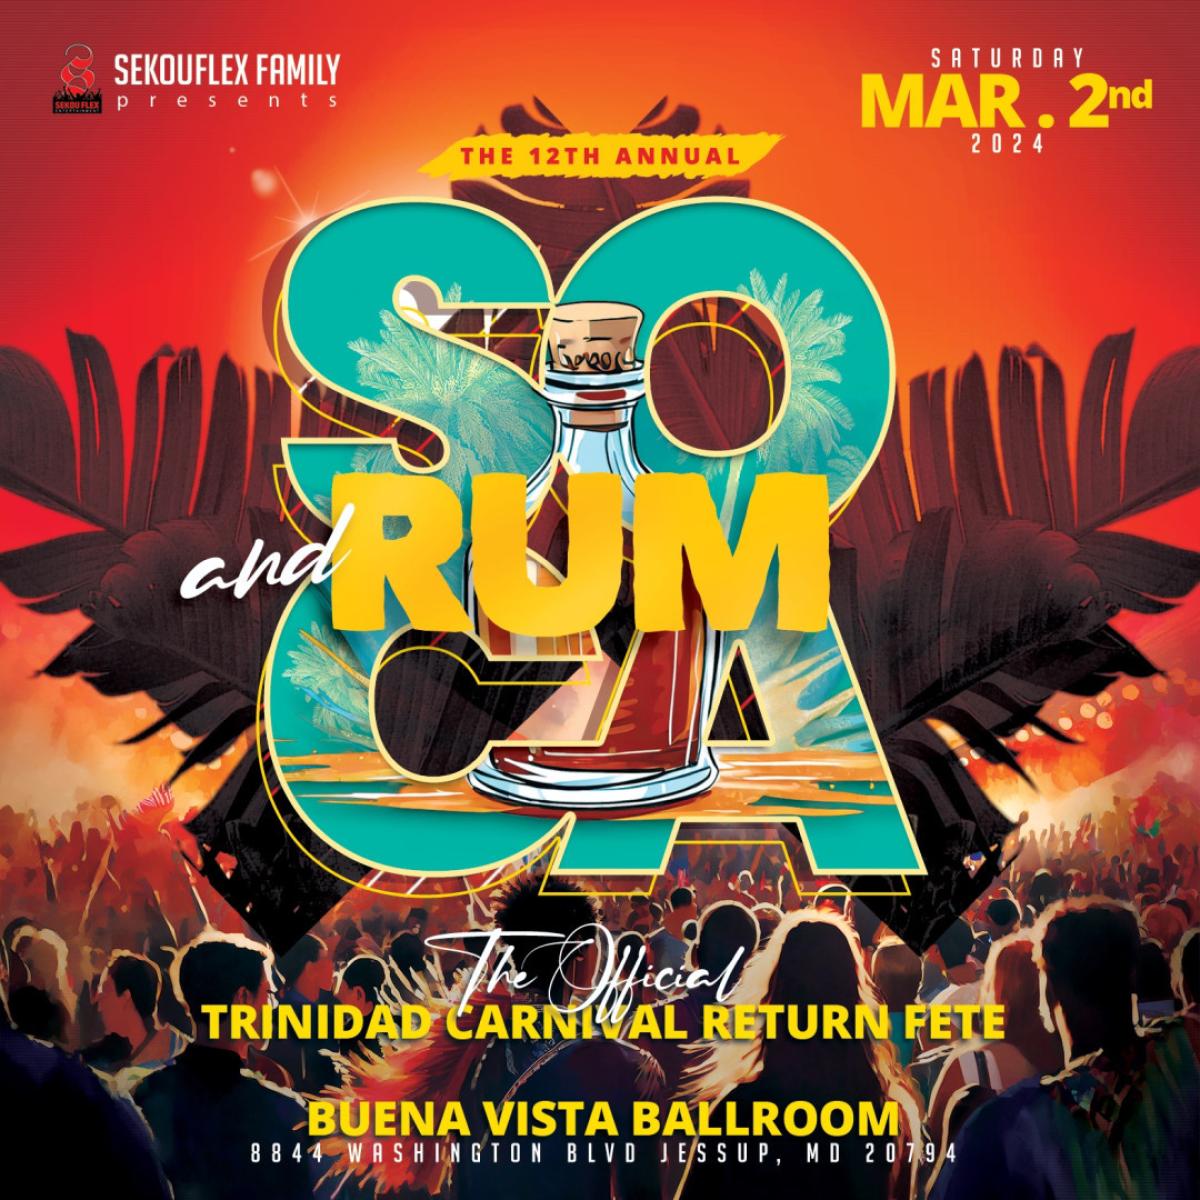 Soca & Rum: The Official Trinidad Carnival Return Fete flyer or graphic.